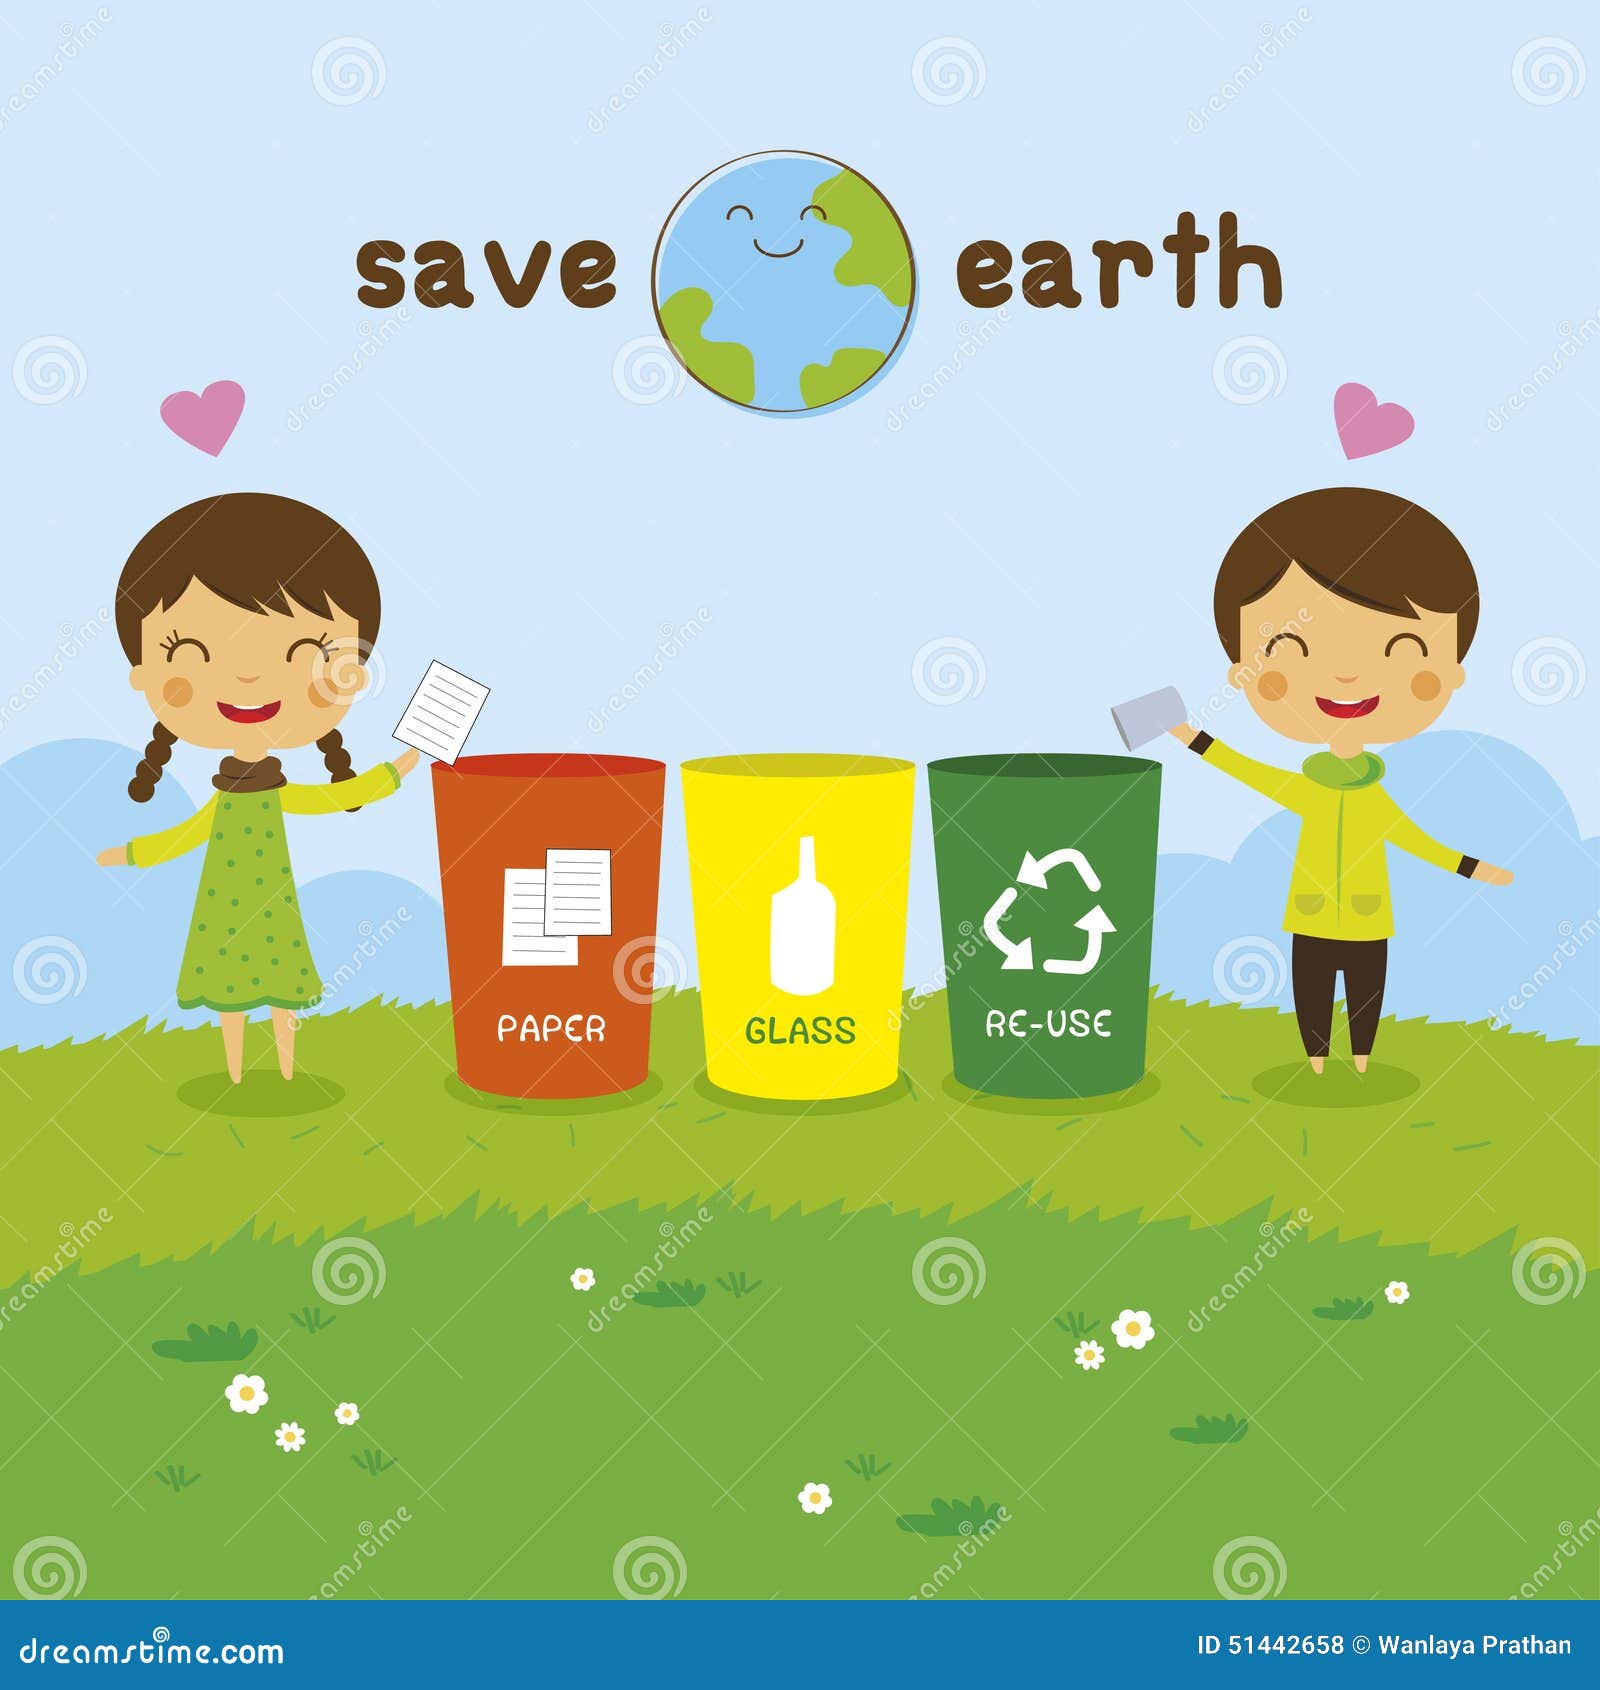 clipart images on save earth - photo #37